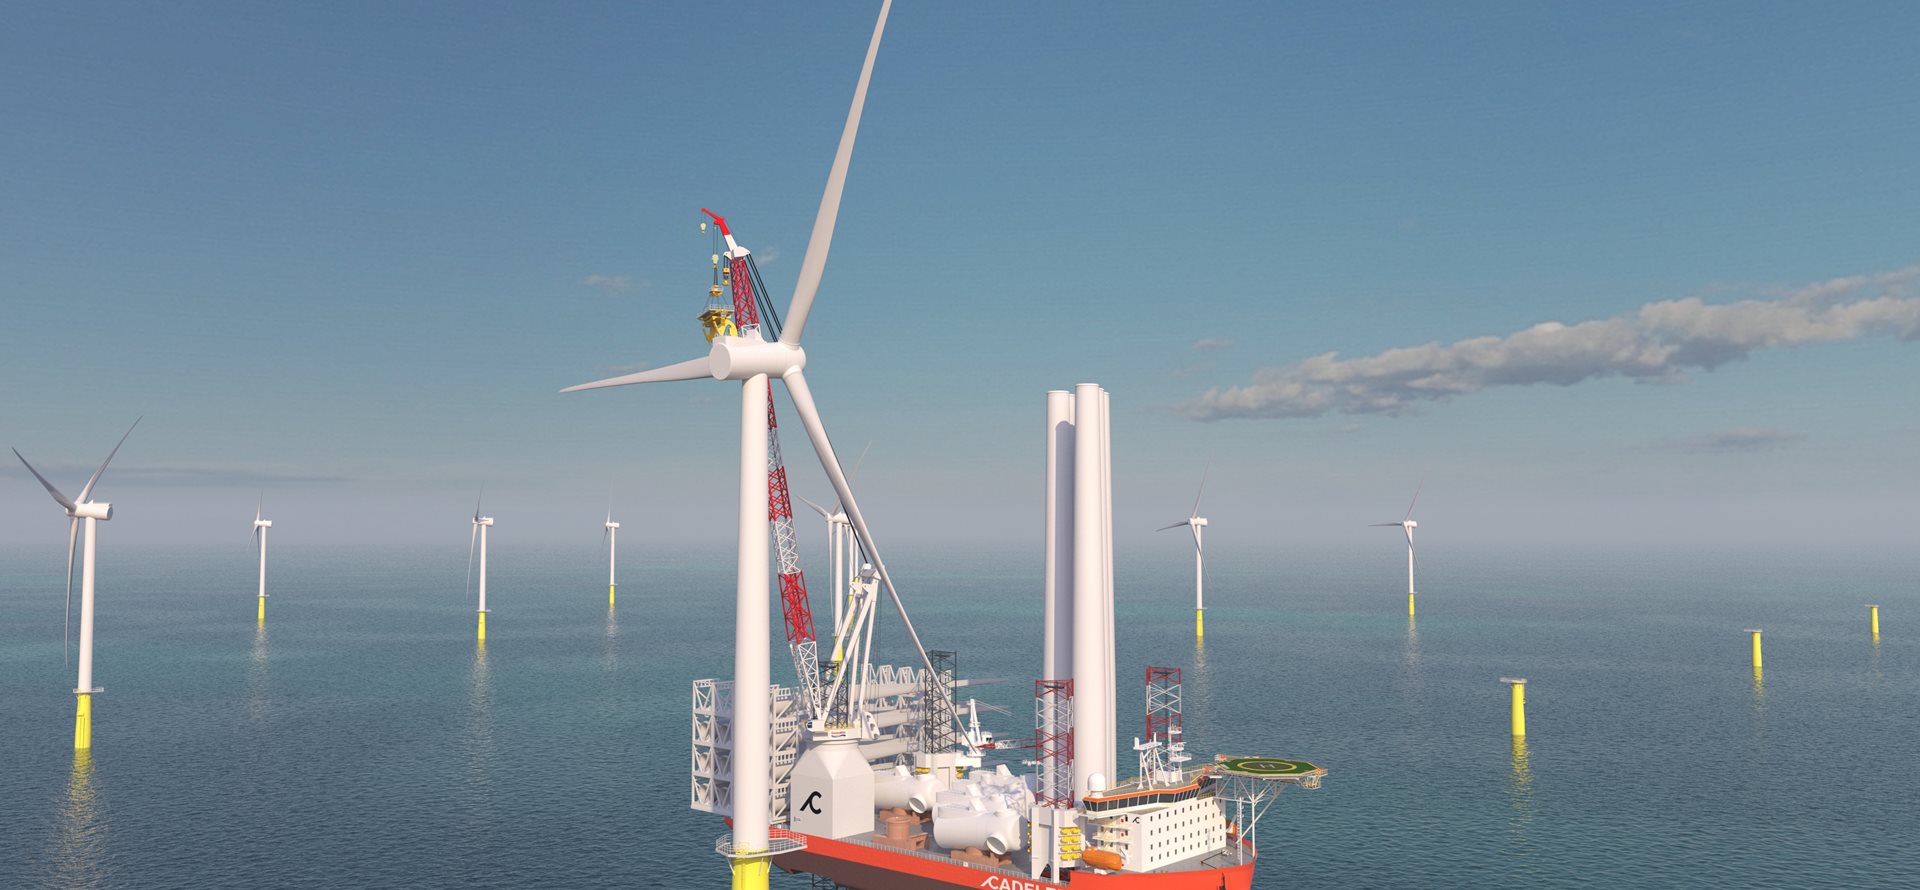 Cadeler to Order Two X-Class Wind Farm Installation Vessels